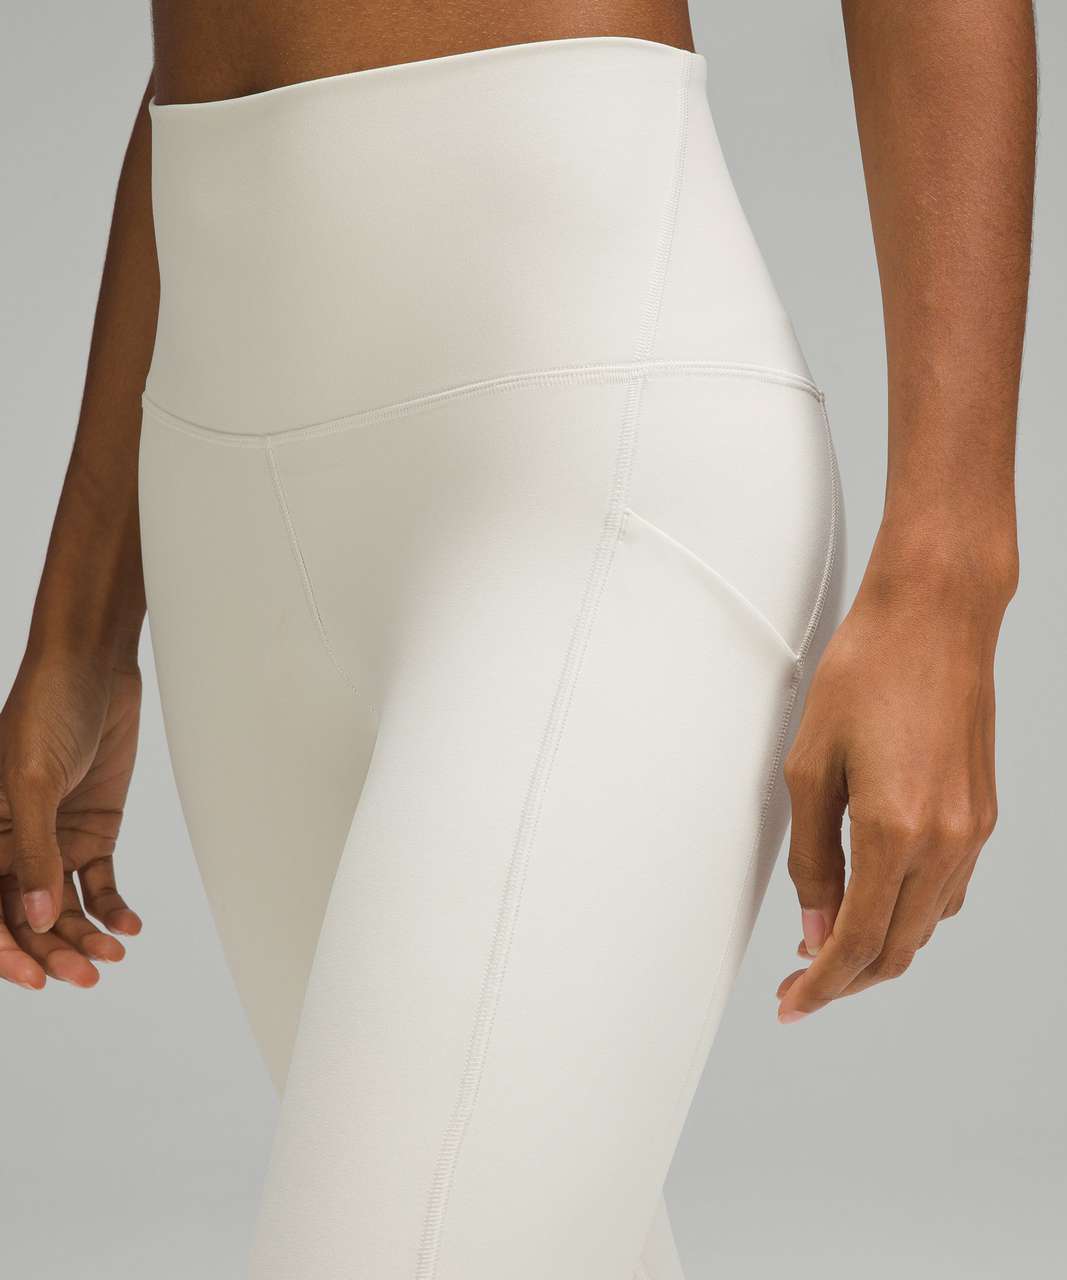 Lululemon Align High-Rise Pant with Pockets 25 Size 2 - $76 - From Mayra